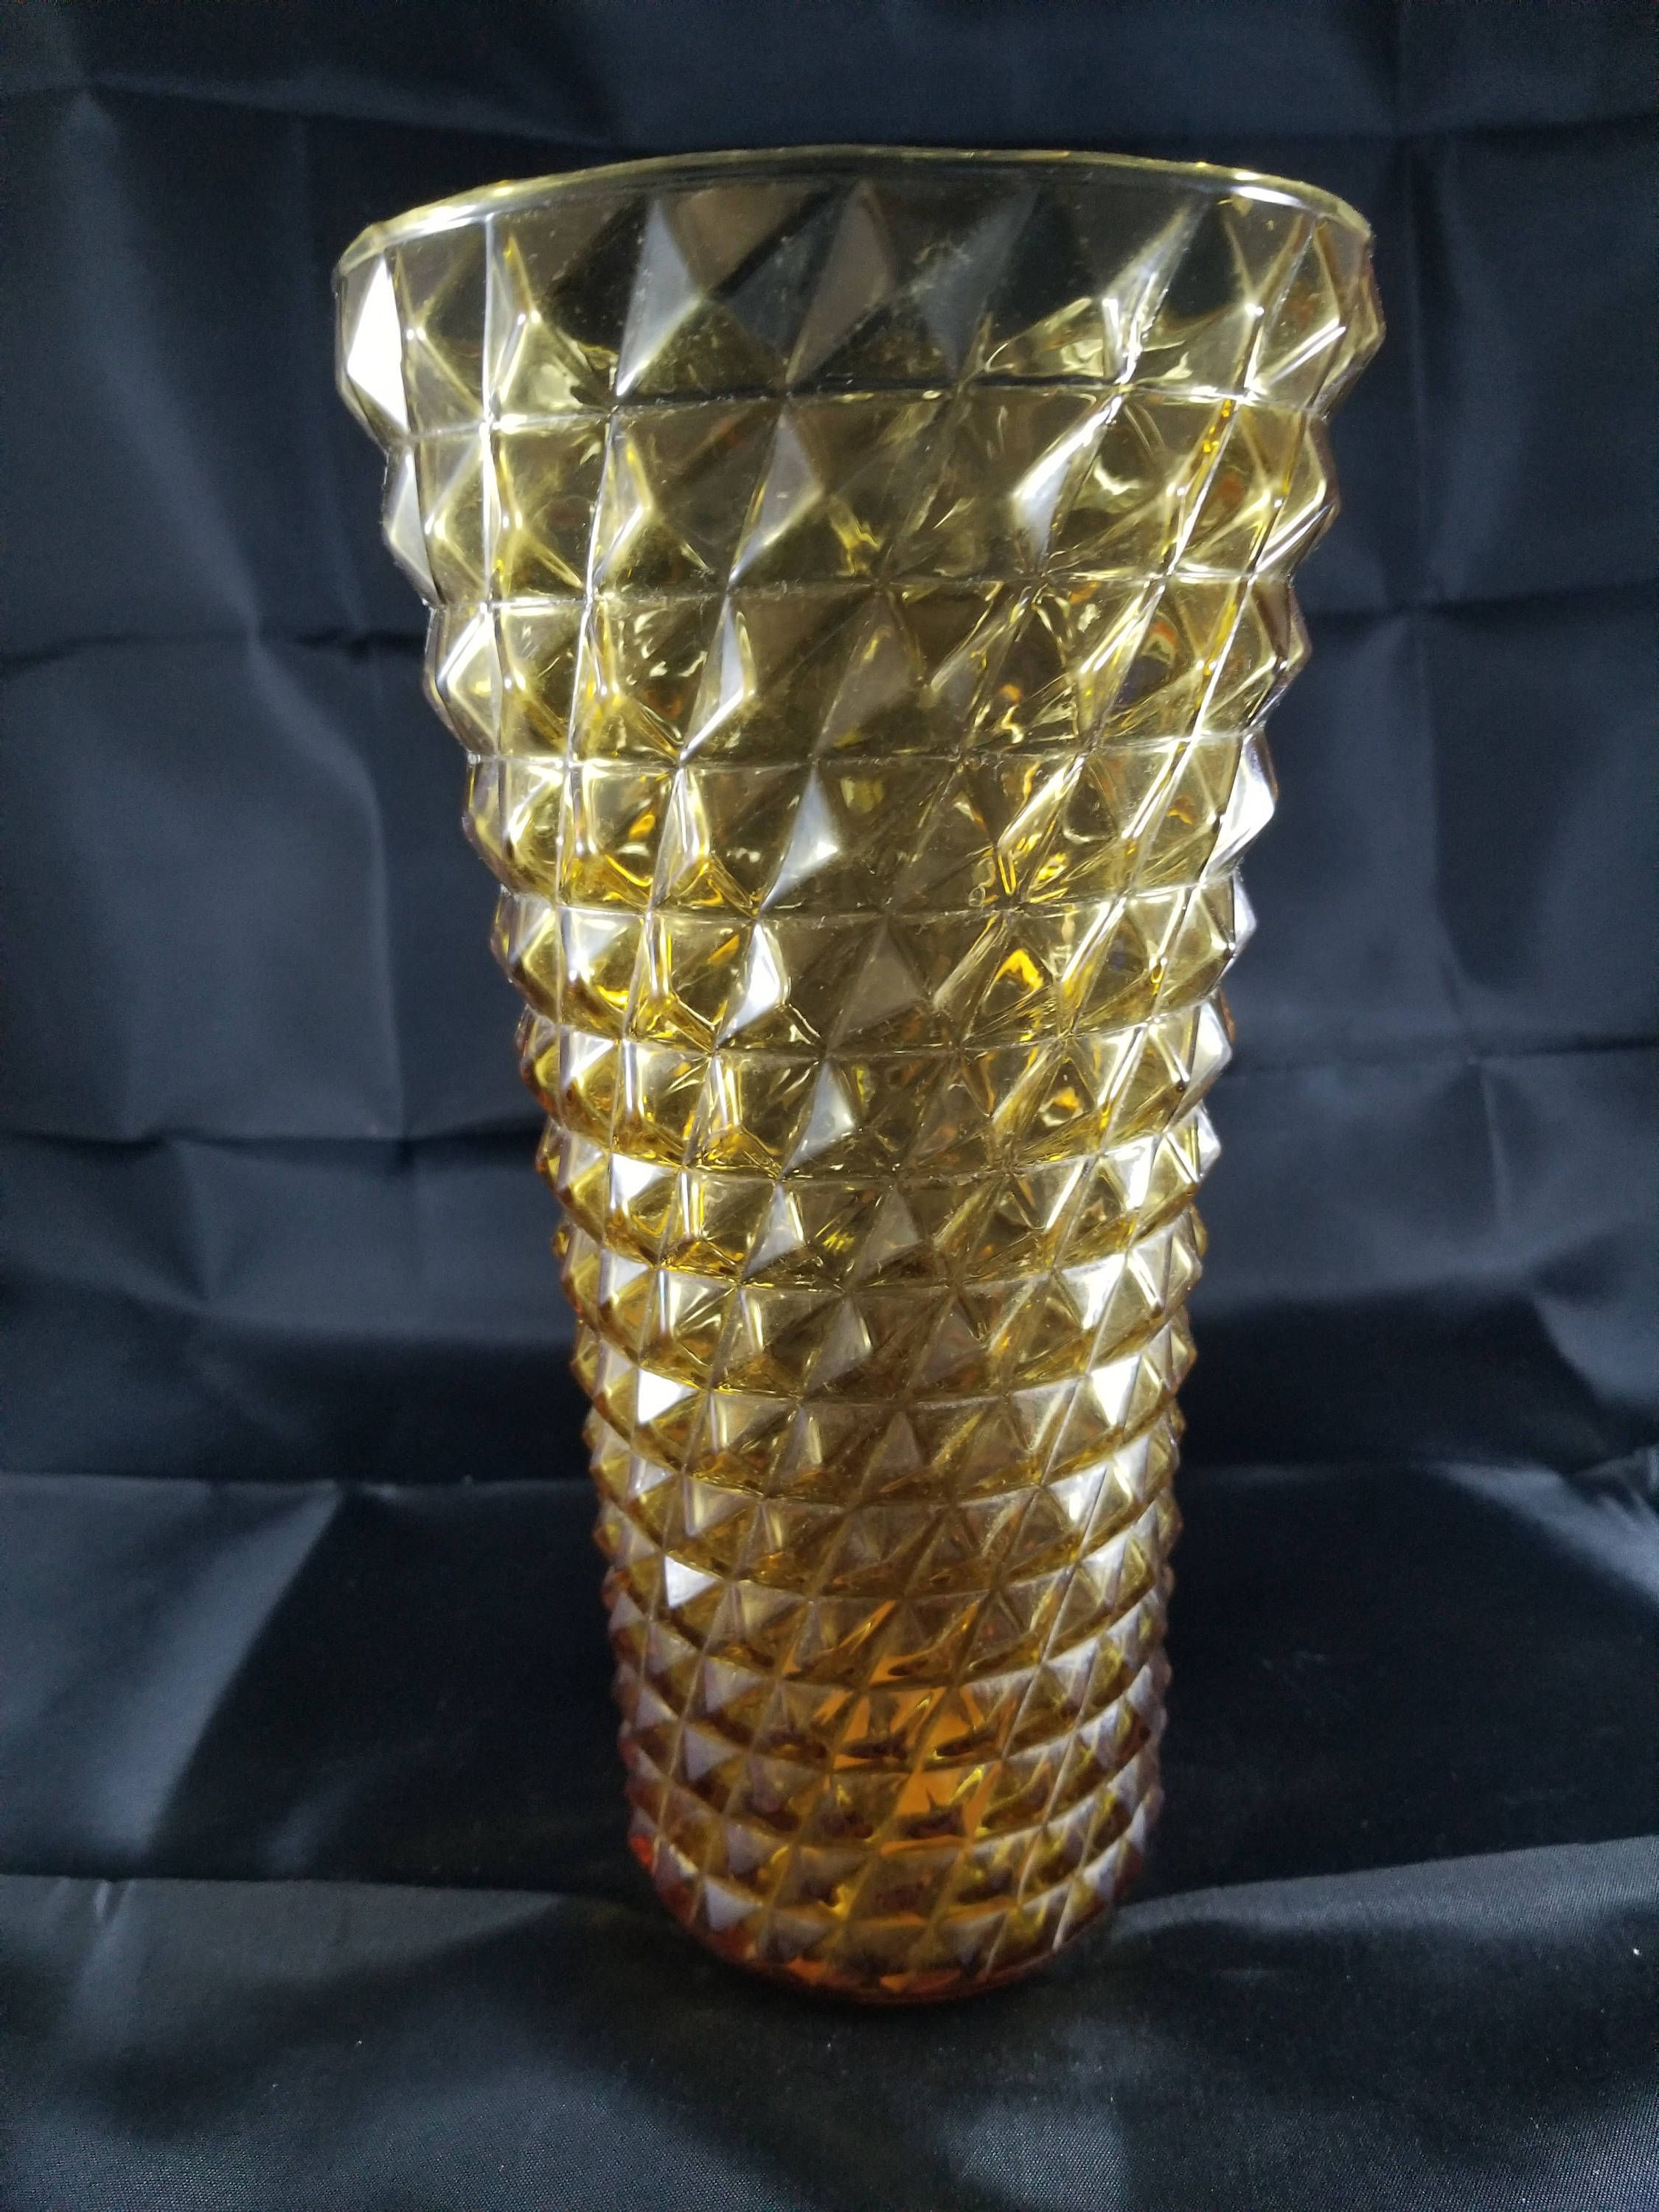 10 Perfect Brass Compote Vase 2024 free download brass compote vase of large rare vintage rossini genuine empoli glass amber hobnail italy for large rare vintage rossini genuine empoli glass amber hobnail italy 9 75tall 5 50 wide by jksarr